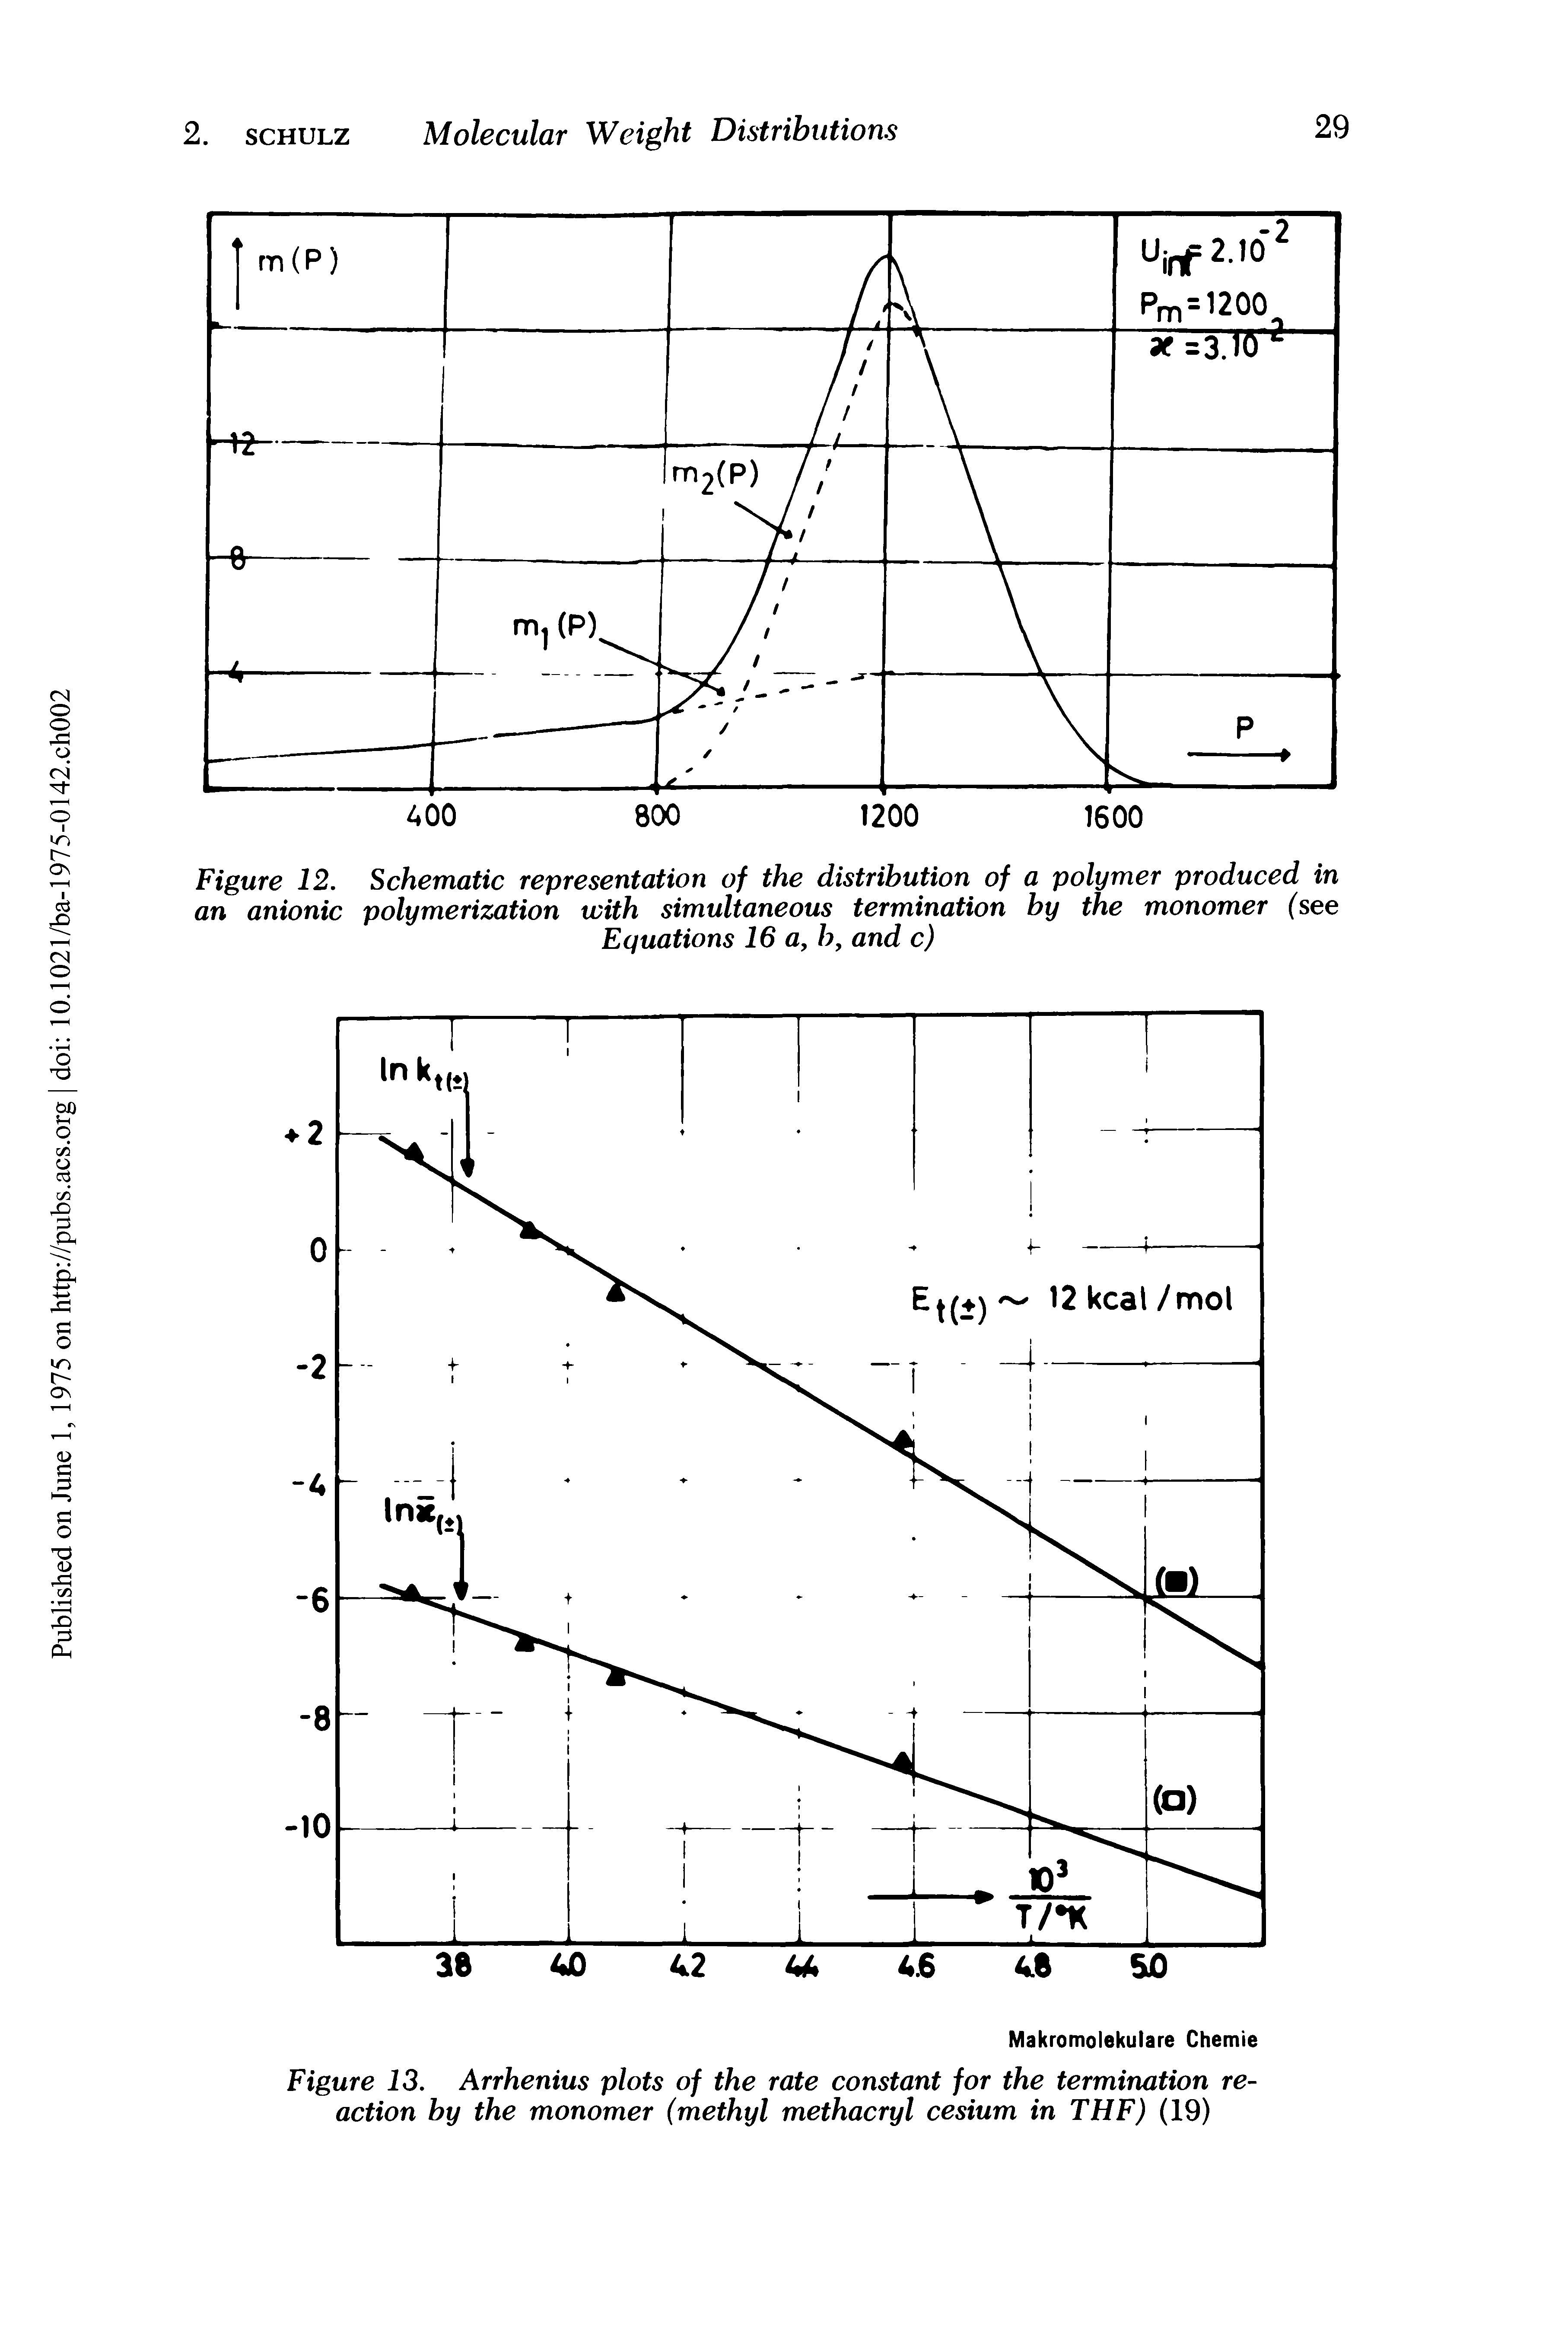 Figure 13. Arrhenius plots of the rate constant for the termination reaction by the monomer (methyl methacryl cesium in THF) (19)...